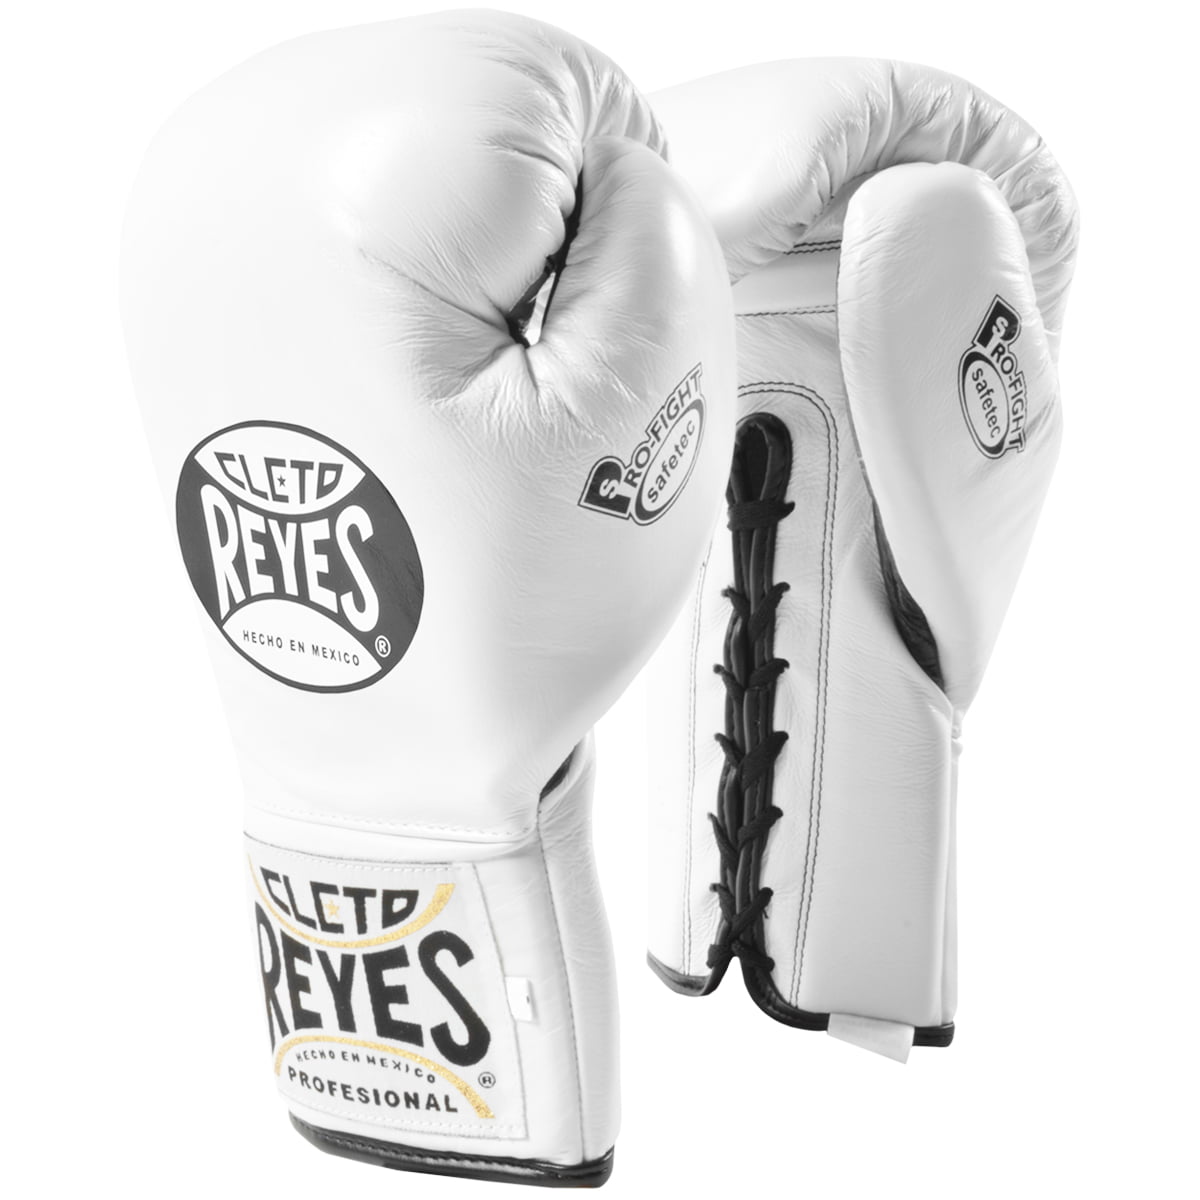 Cleto Reyes Safetec Professional Boxing Fight White Gloves Leather Free Shipping 